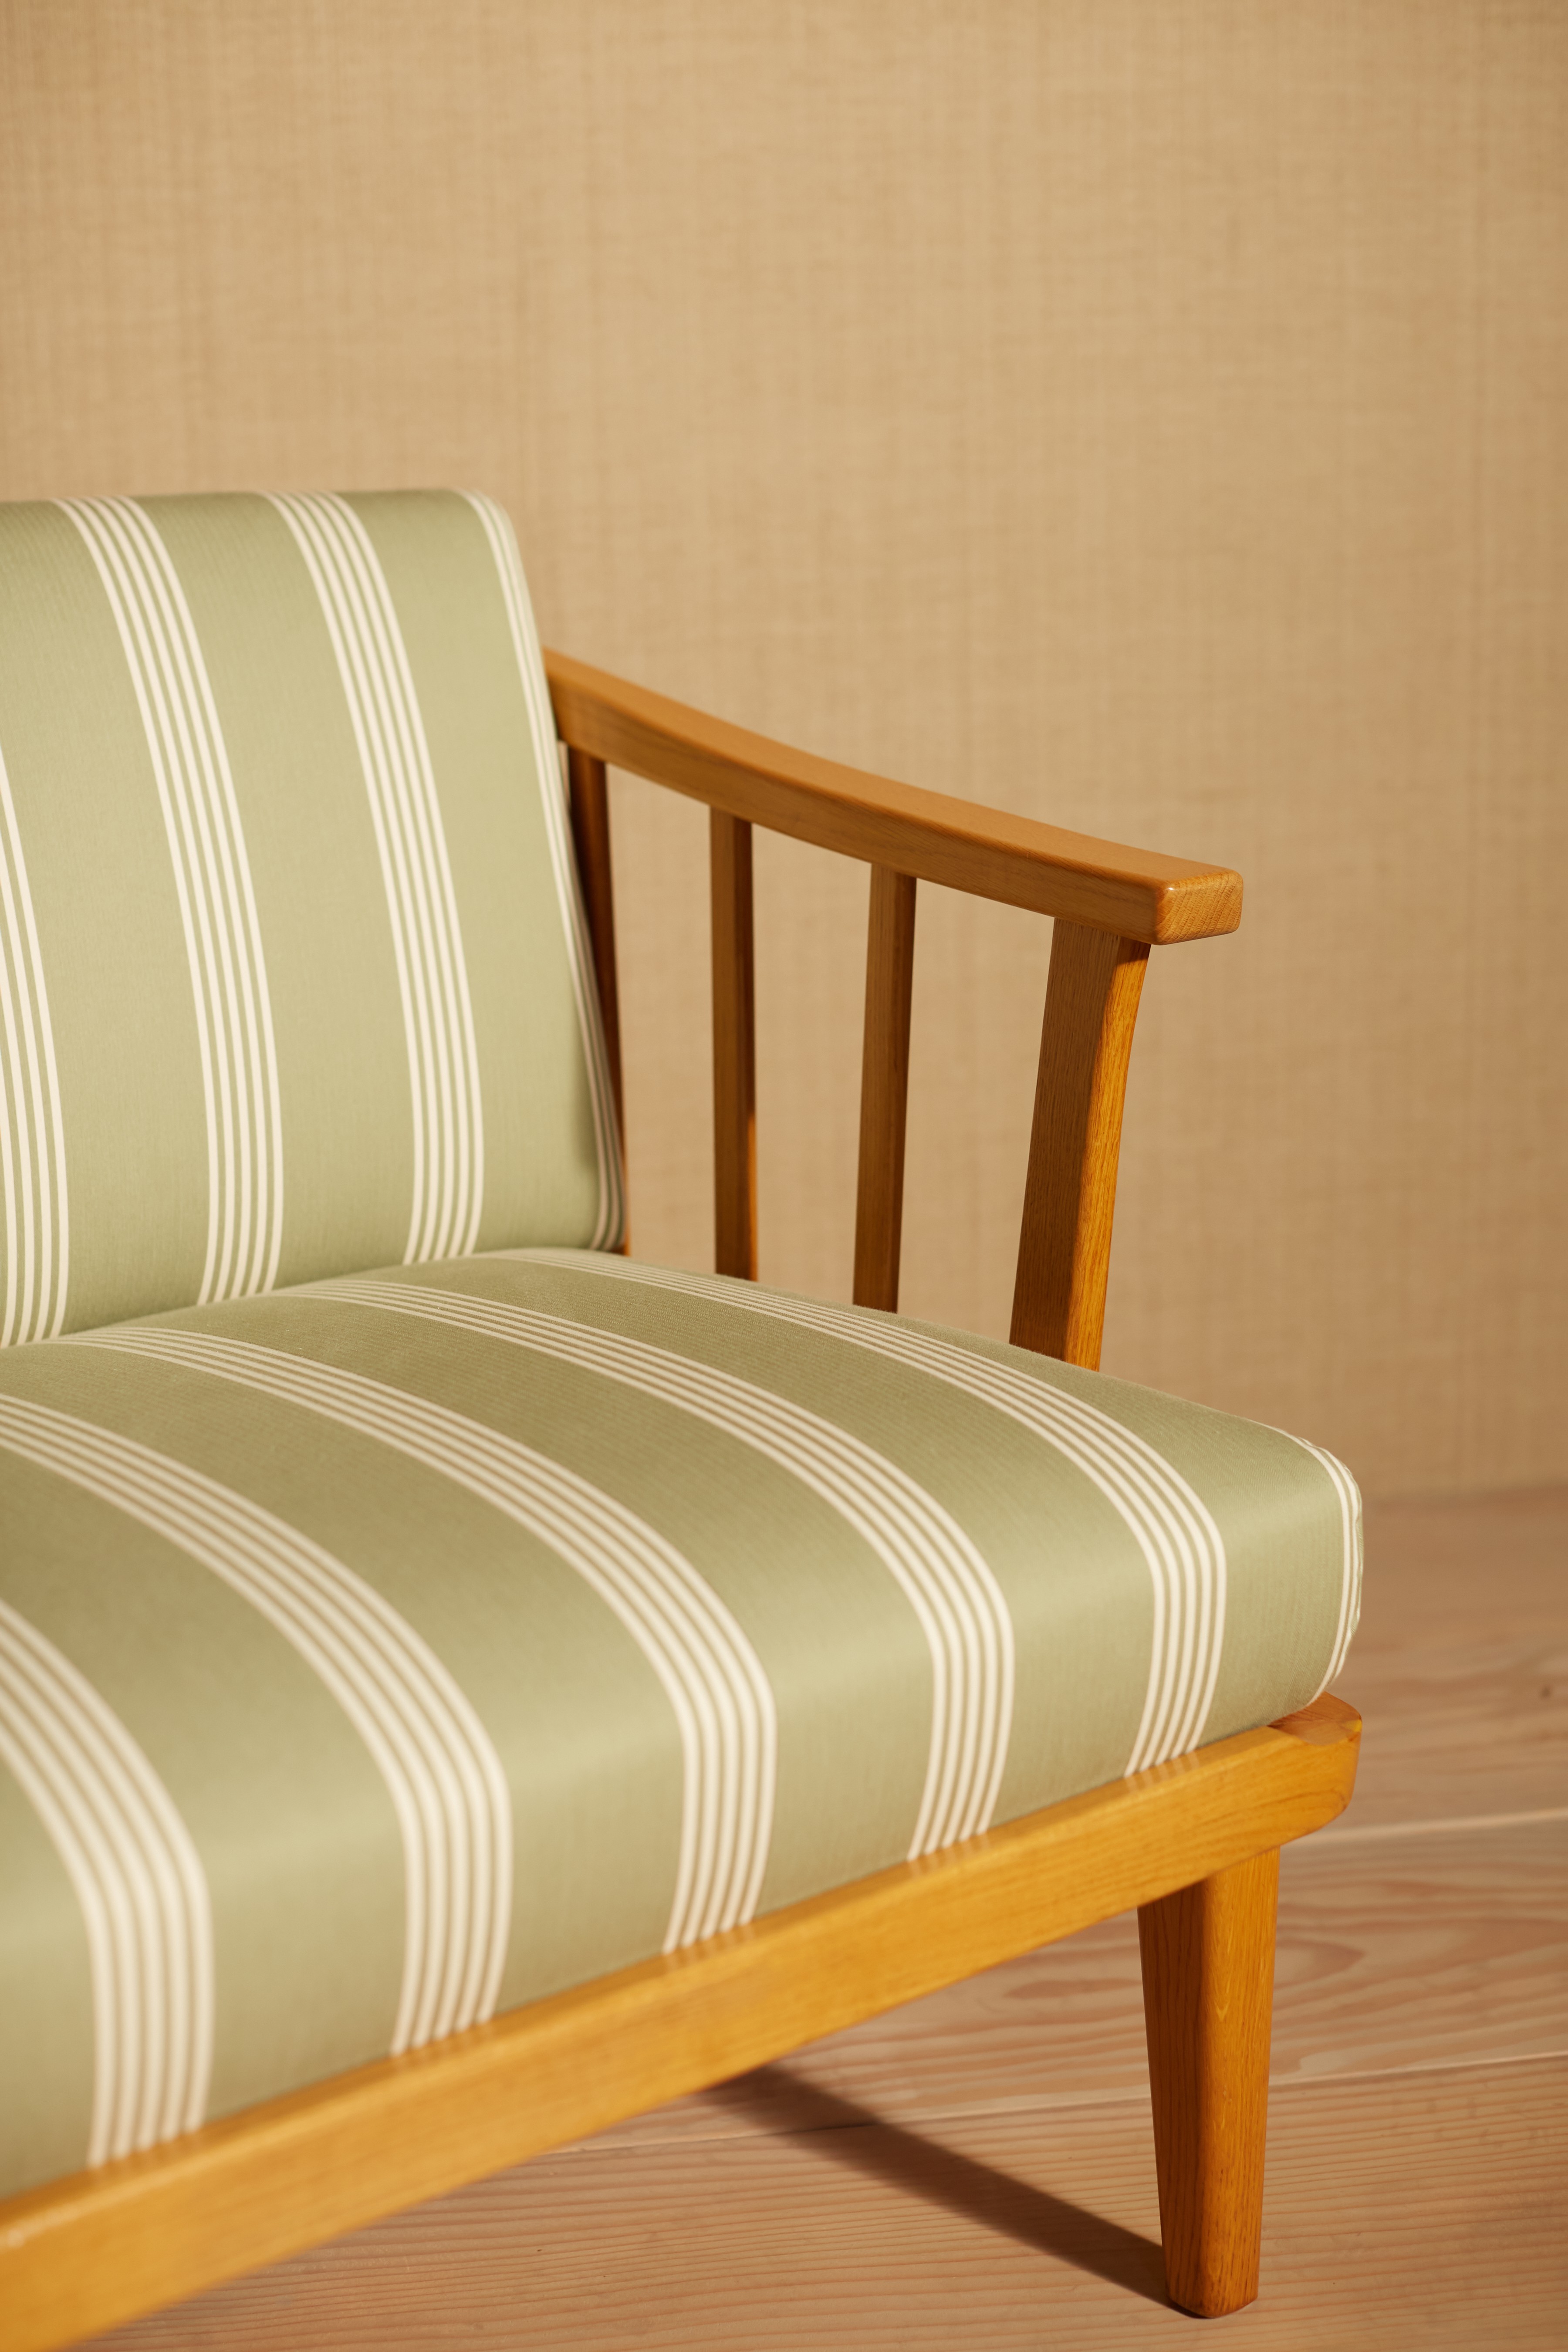 a wooden chair with a striped seat cushion